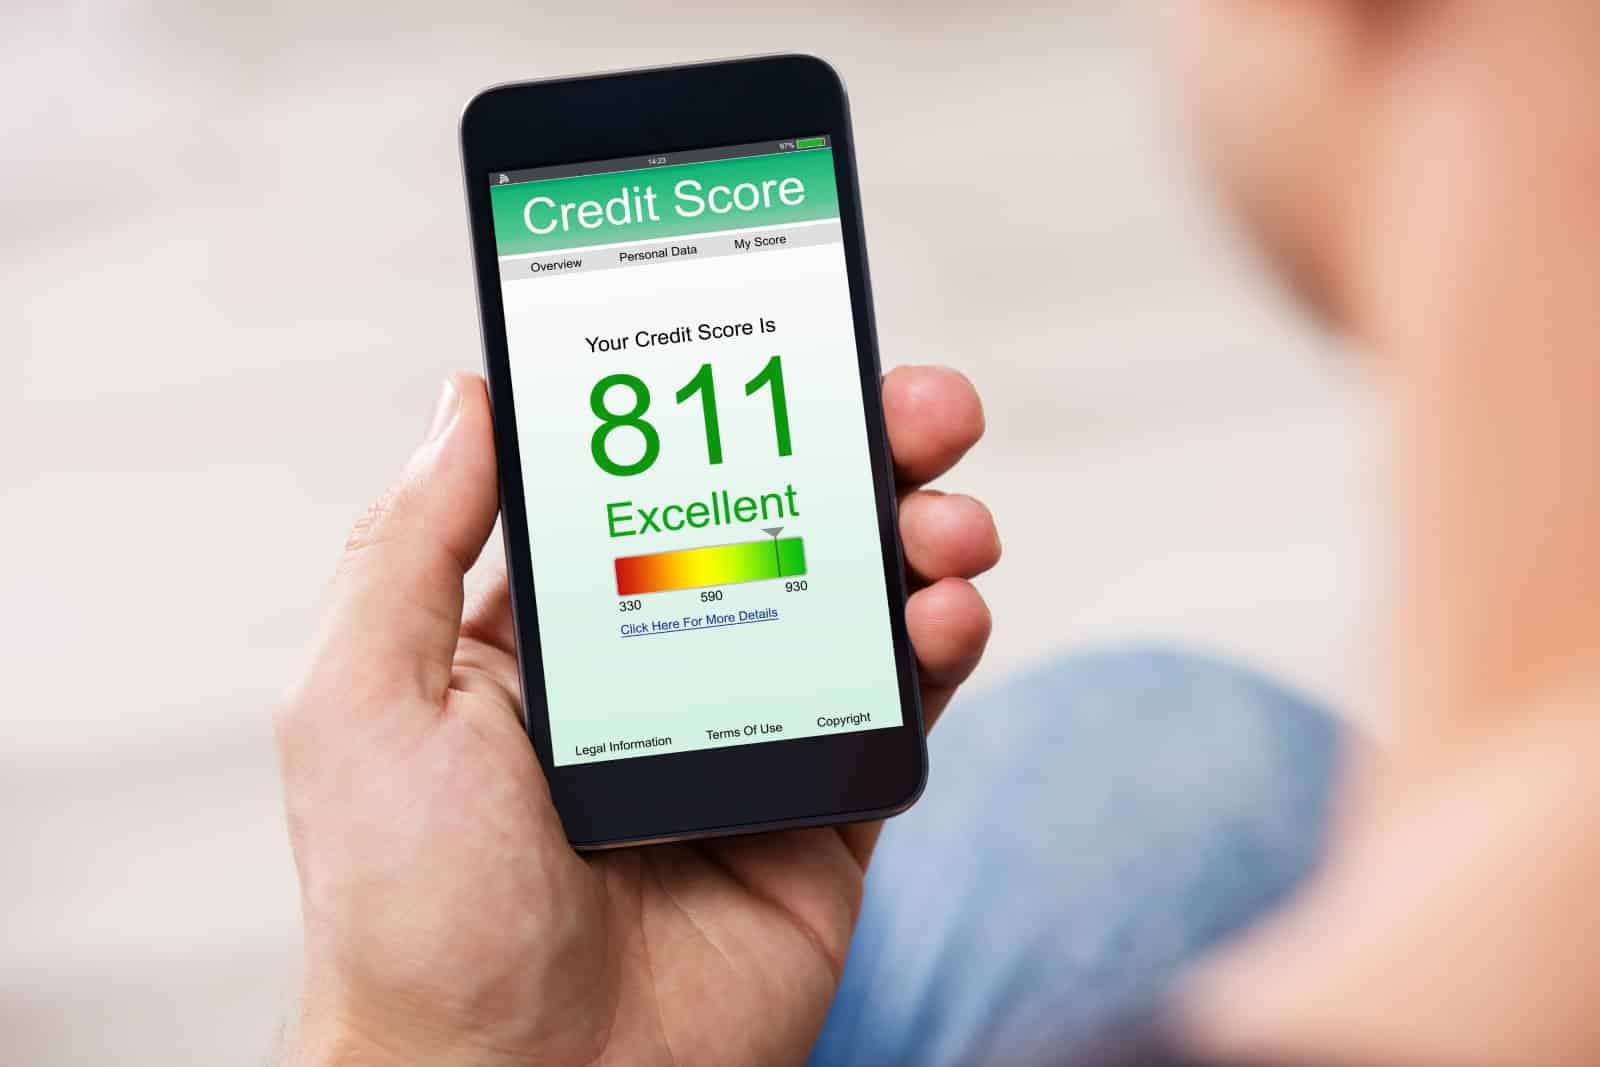 <p><span>Monitor your credit score regularly using free credit monitoring services or apps to track changes, detect errors, and identify areas for improvement, ensuring financial stability and access to credit.</span></p> <p><span>Actionable Step: Sign up for a free credit monitoring service or check your credit score through reputable websites annually to stay informed about your credit health.</span></p>